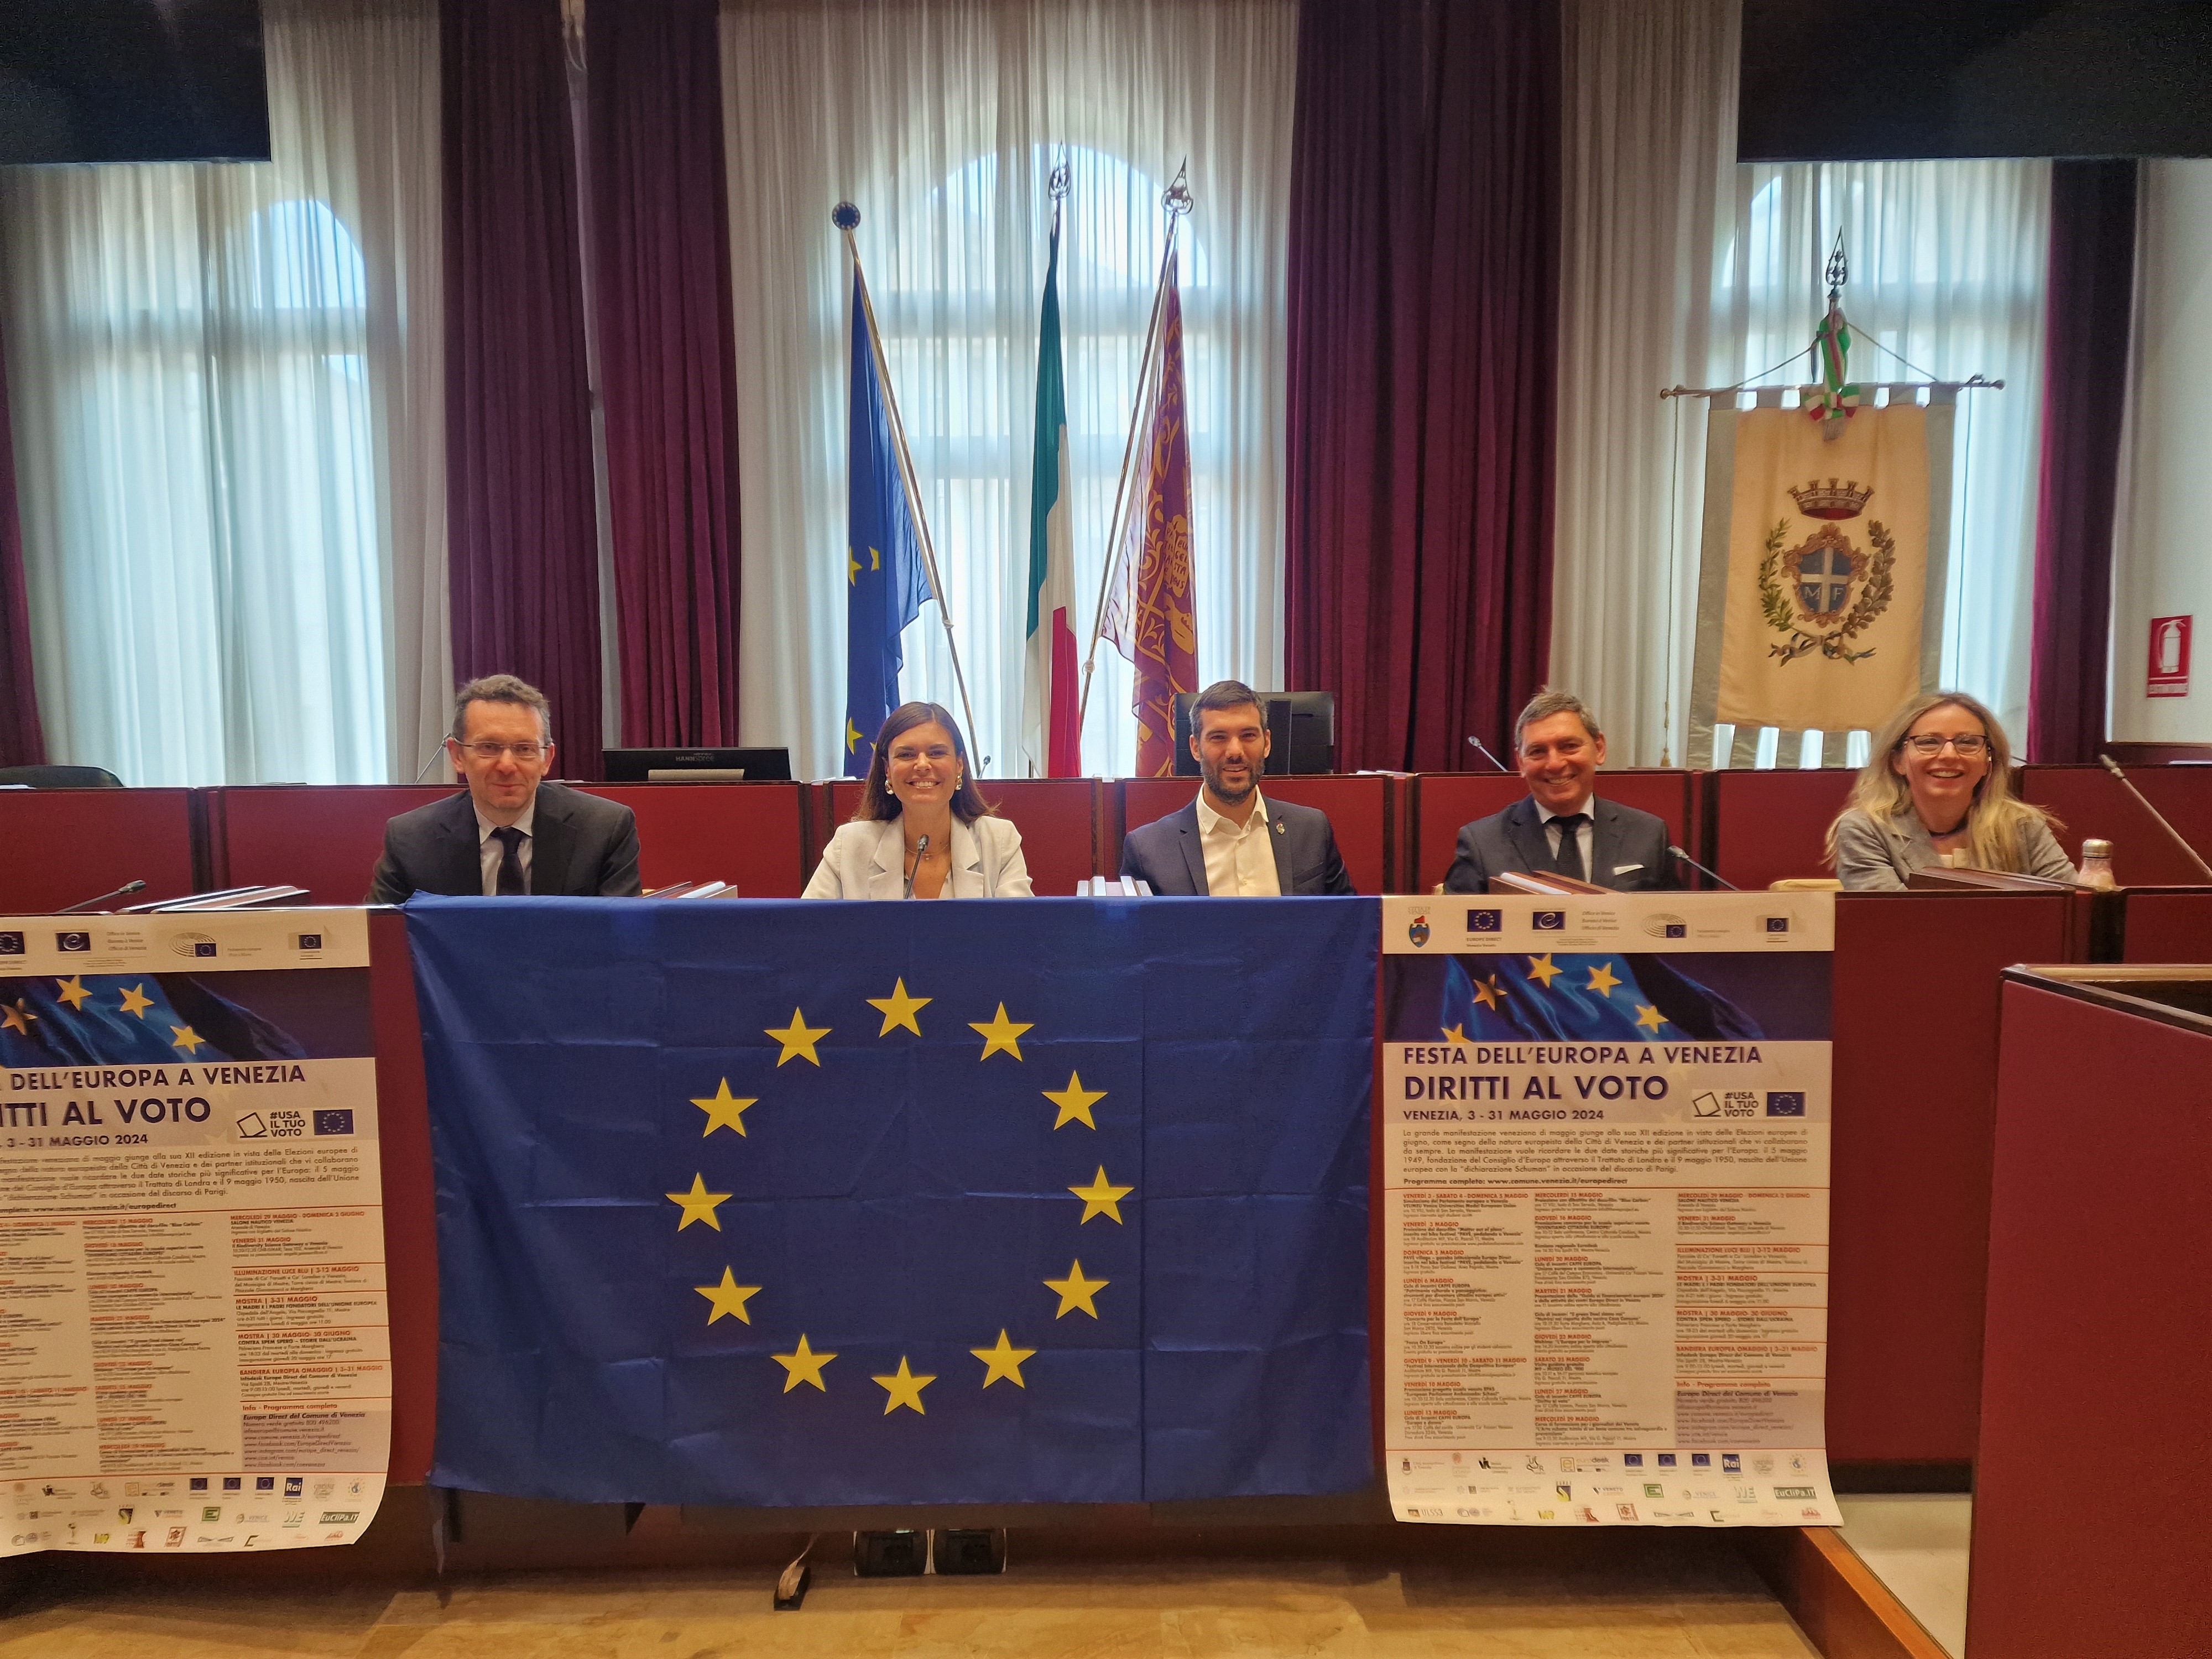 Council of Europe and European Days are back in Venice